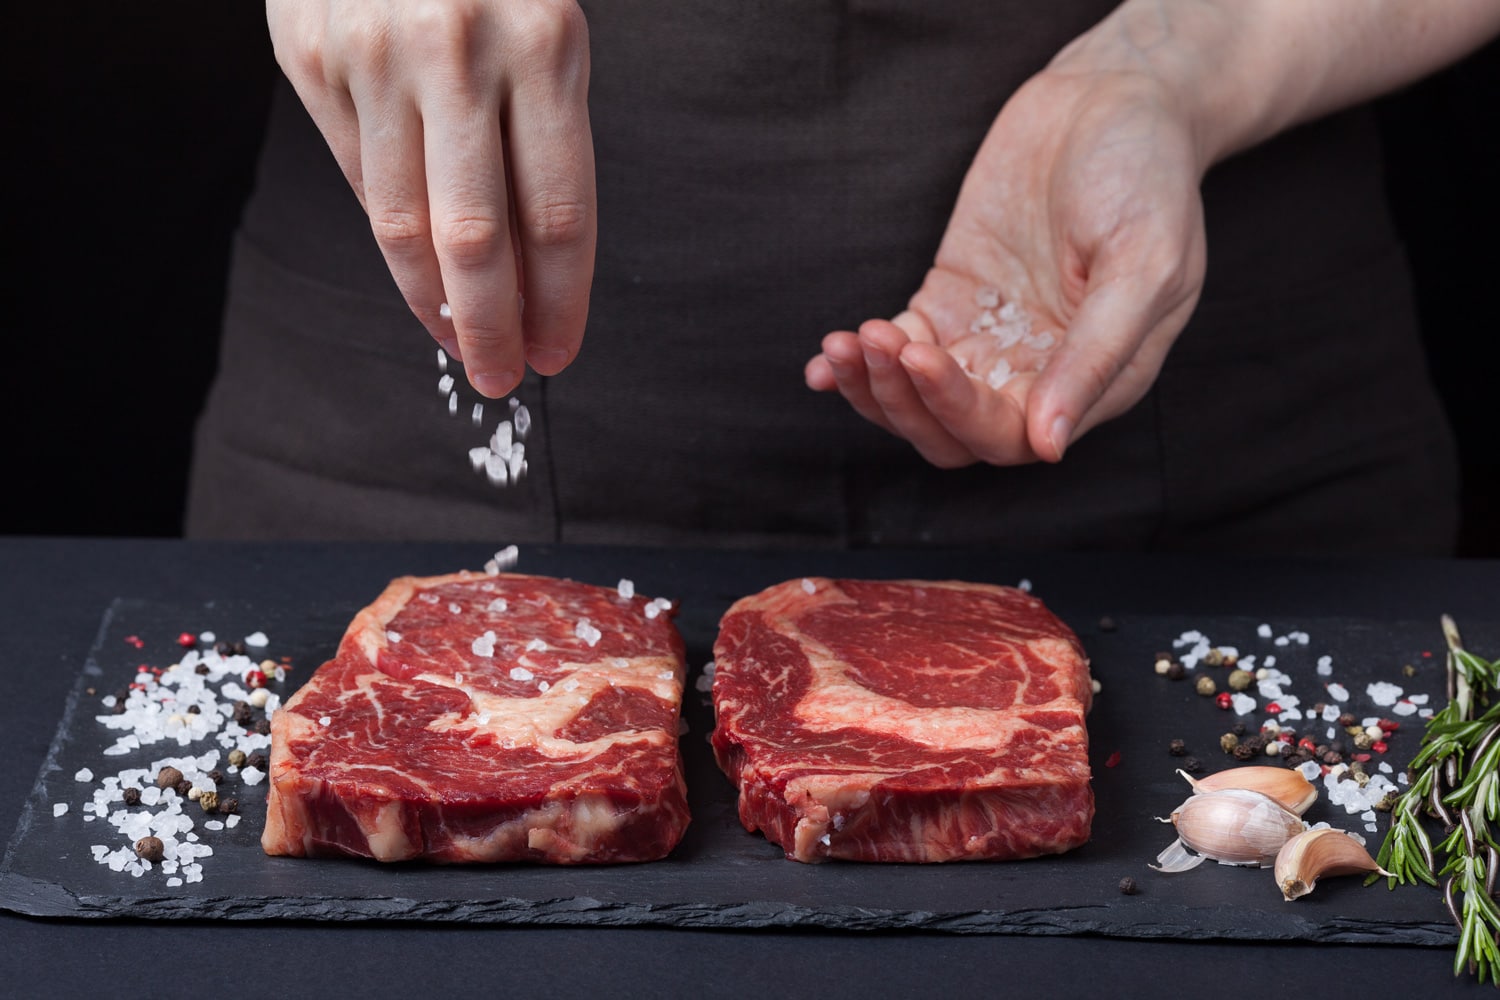 A female chef sprinkles sea salt with two fresh raw ribeye steaks from marbled beef on a dark background.